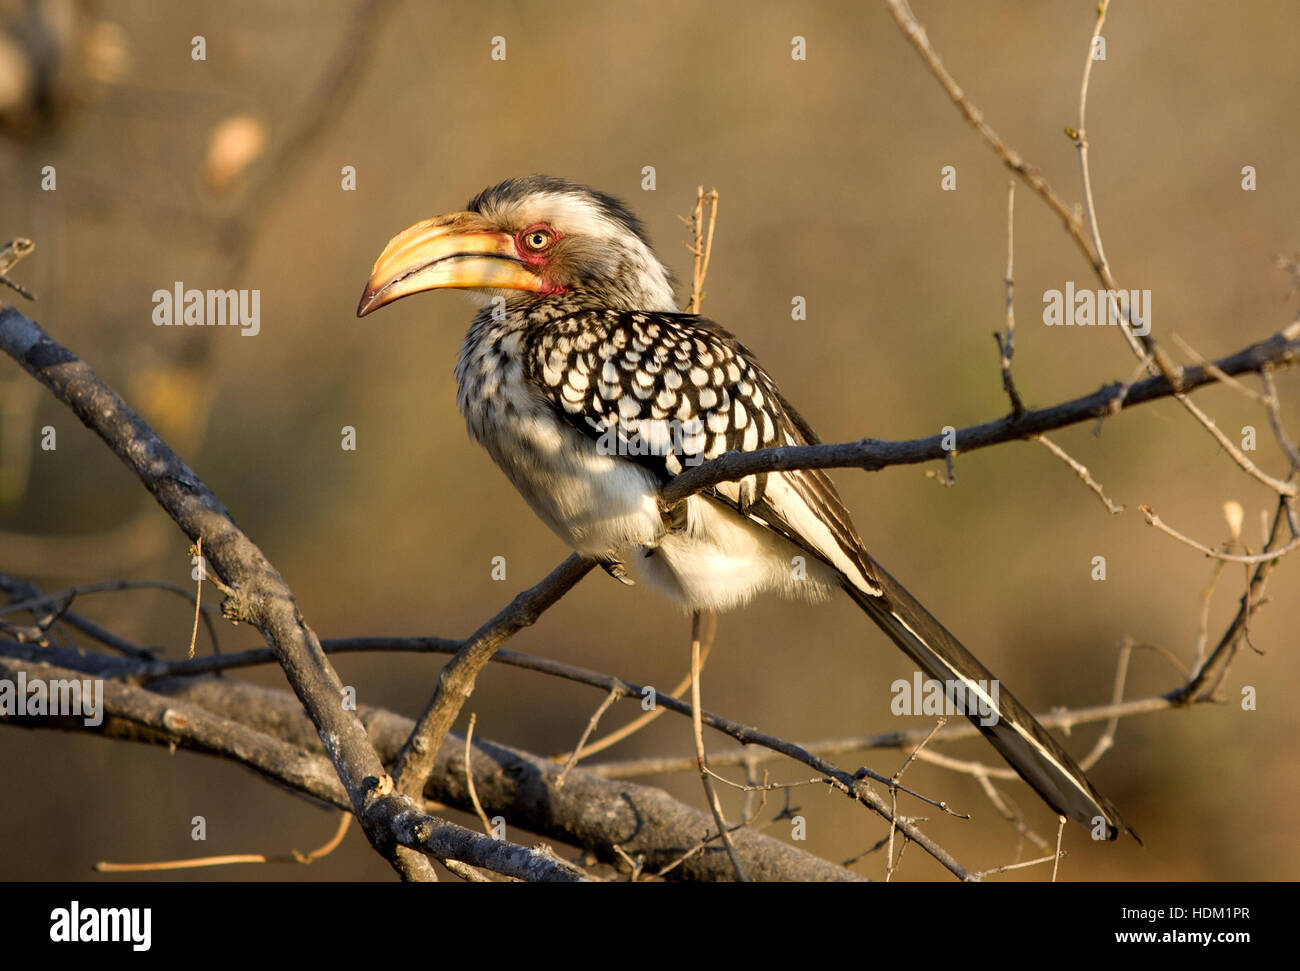 Yellow-billed Hornbill in South Africa Stock Photo